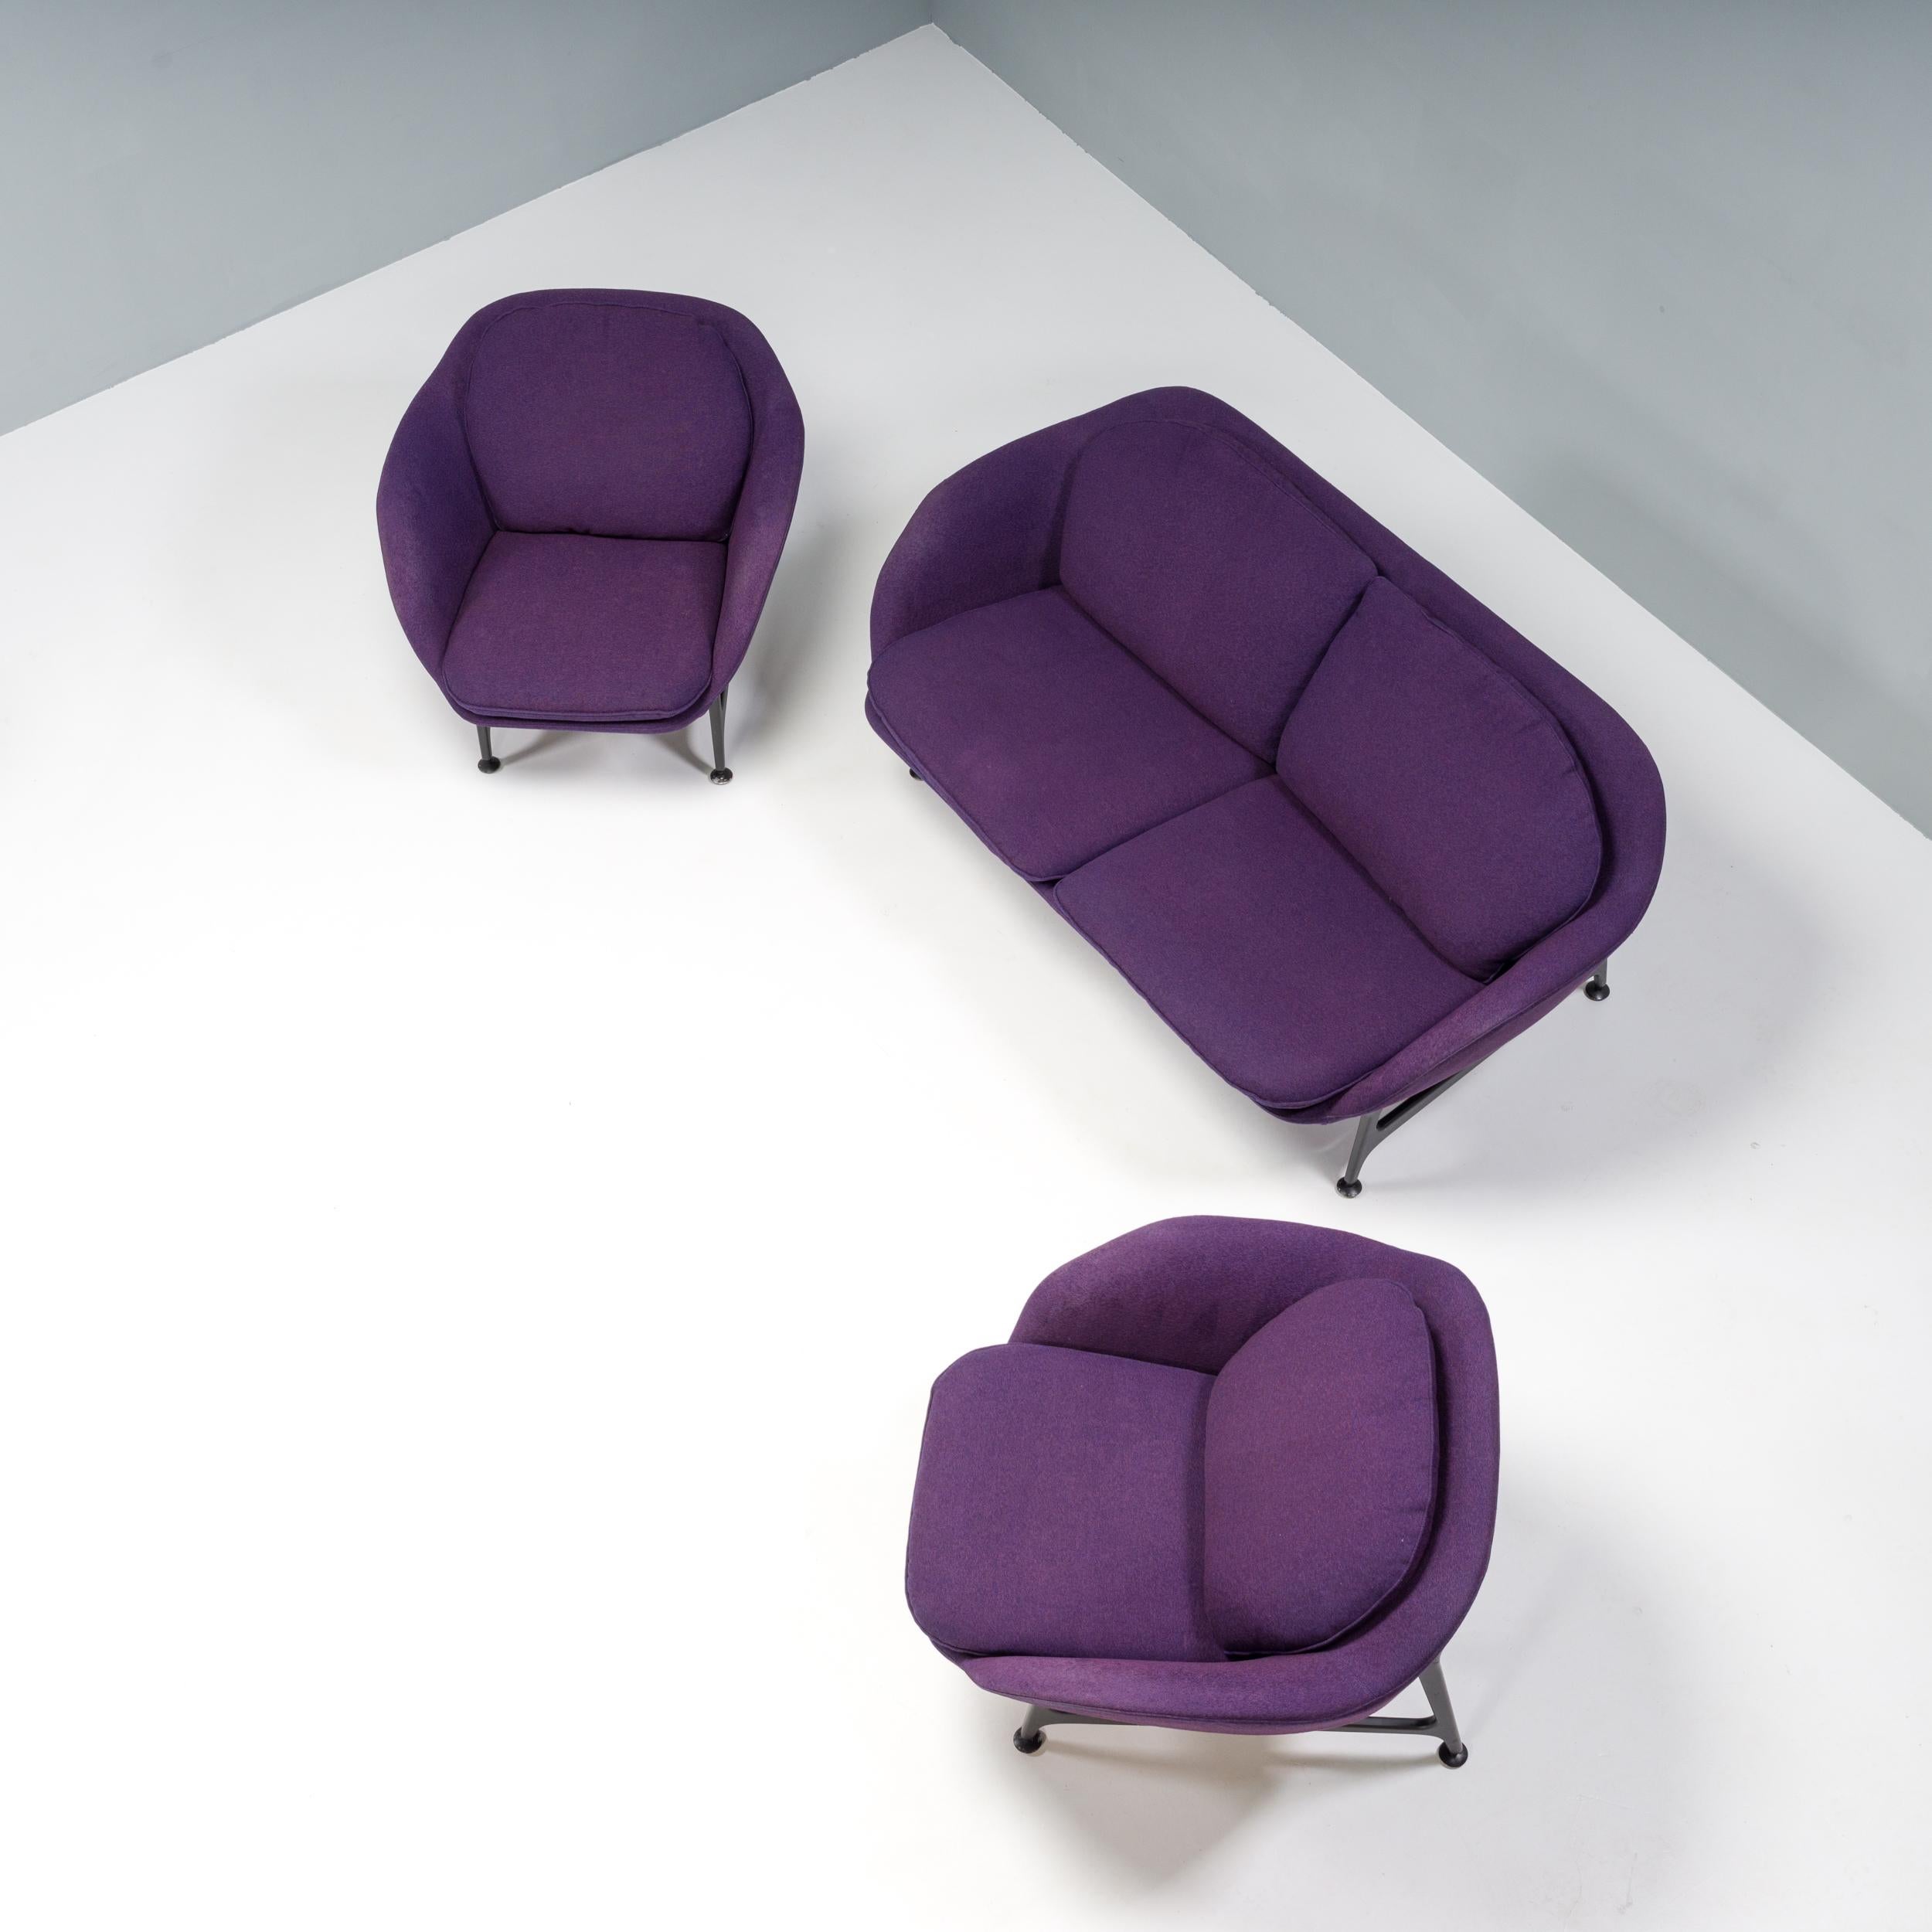 First presented at the Salone del Mobile in 2014, the Vico seating collection was designed by Jaime Hayon for Cassina and named after his son.

Inspired by the Cassina archives, Hayon’s design for Vico perfectly balances the past with modern design